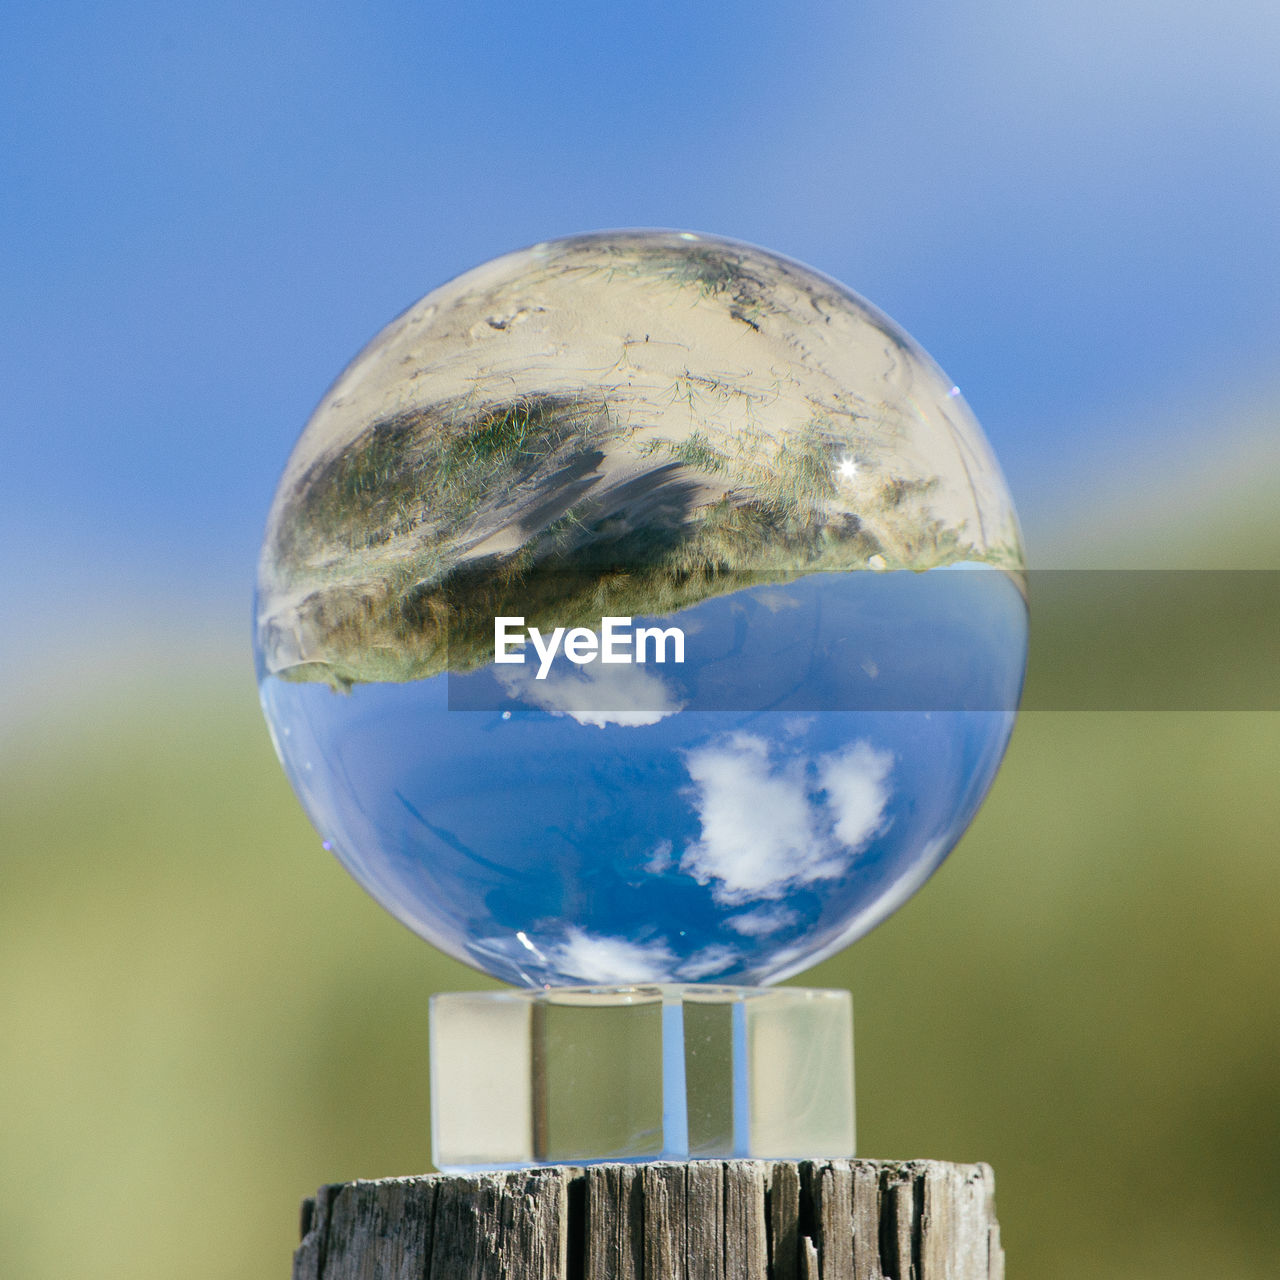 CLOSE-UP OF CRYSTAL BALL AGAINST BLUE SKY WITH WATER